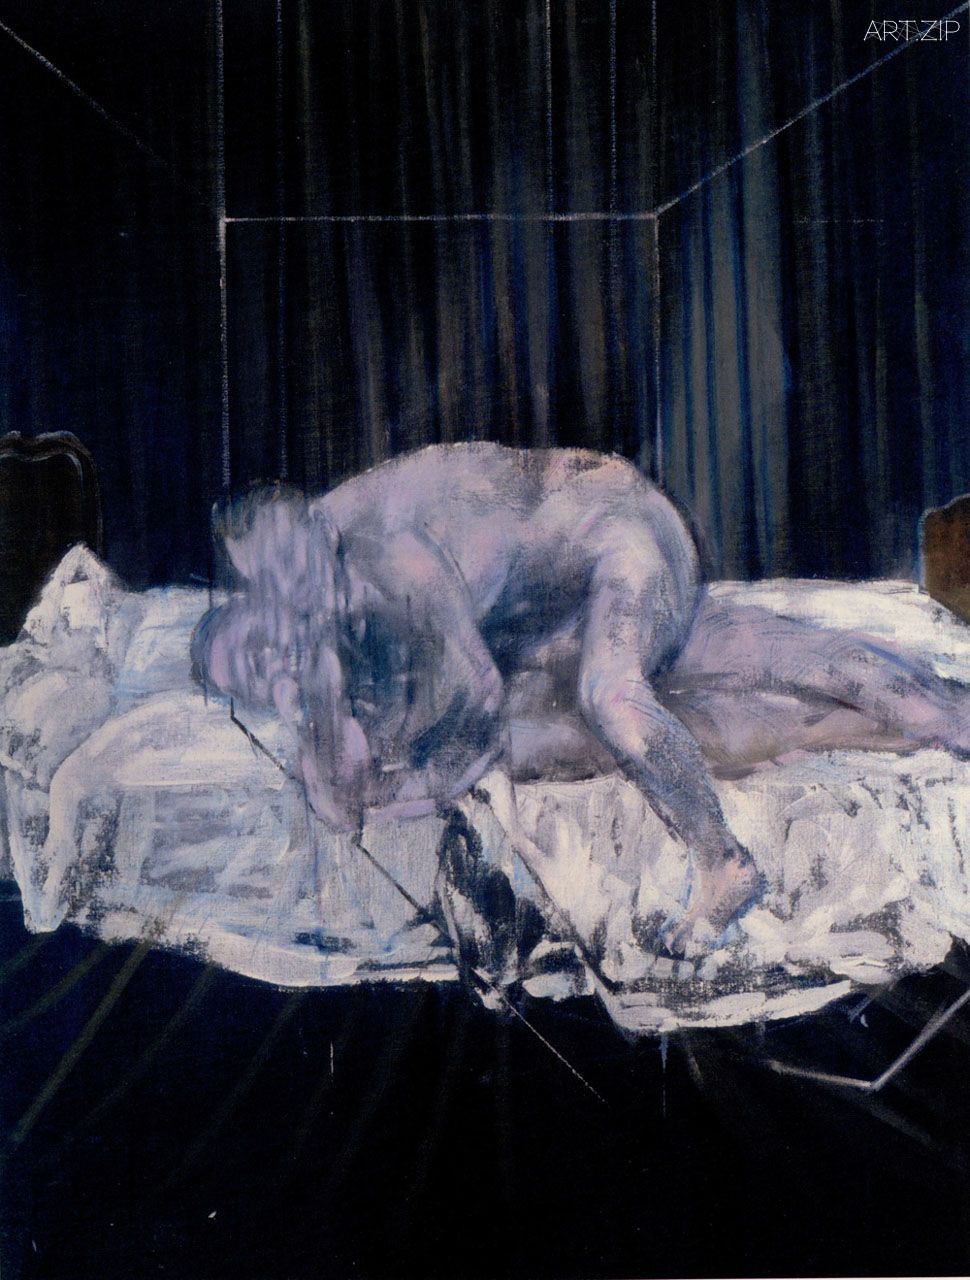 Fig. 11 Francis Bacon, Two Figures, 1953, Oil on Canvas, 1525 x 1165 mm, Private Collection